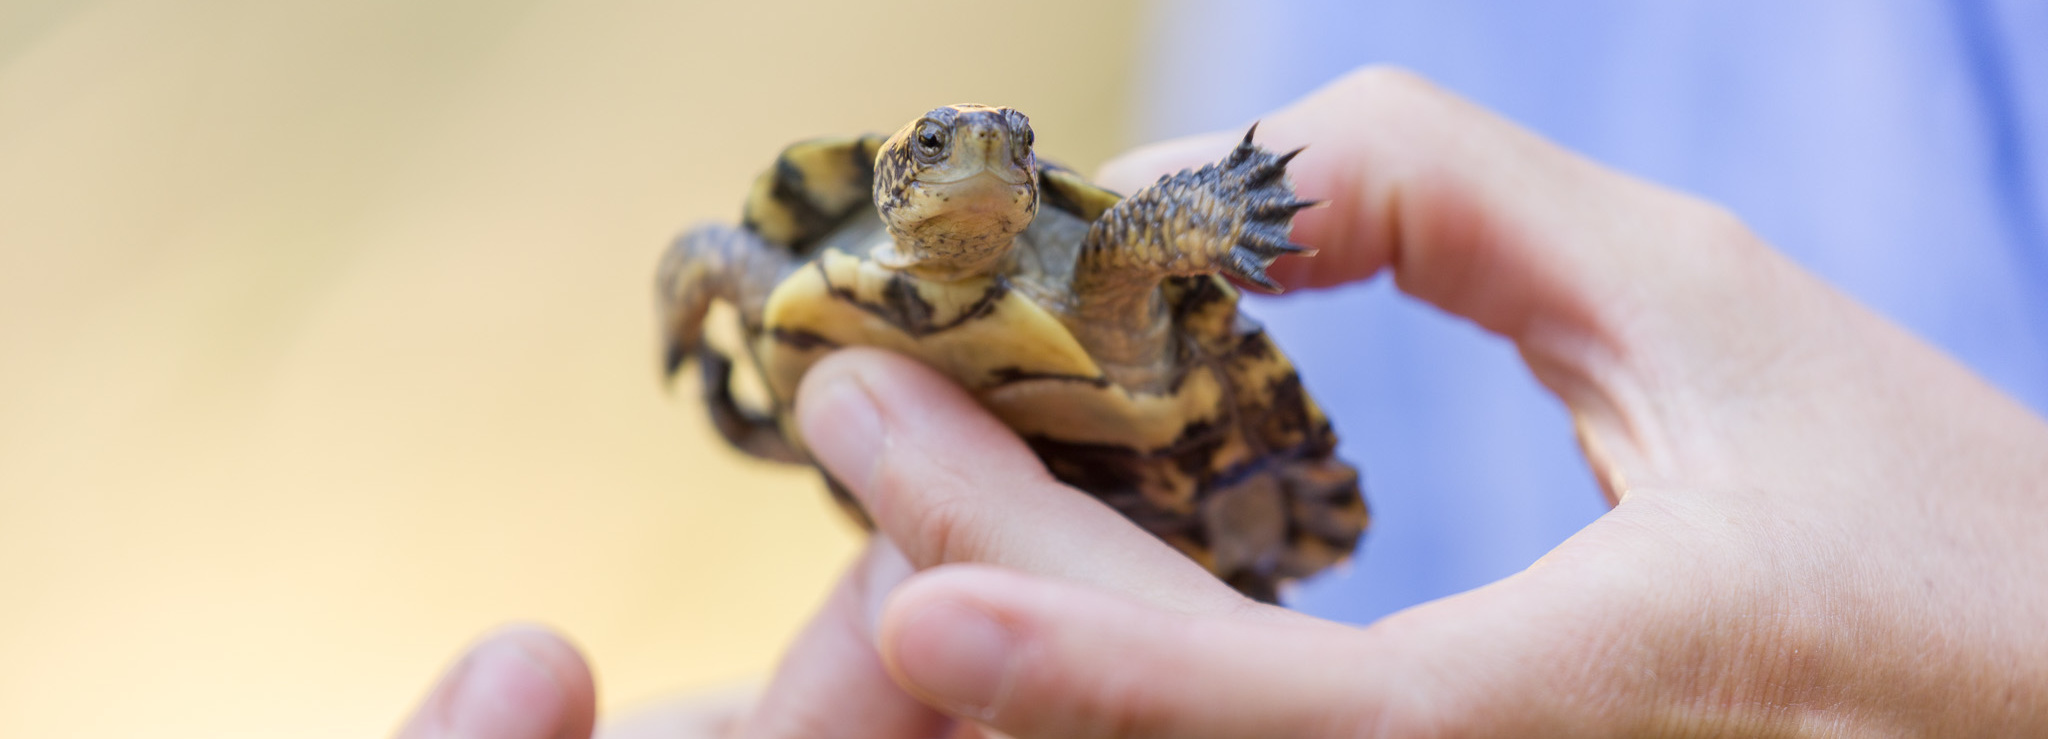 A Life-Changing Experience: Releasing the Western Pond Turtle